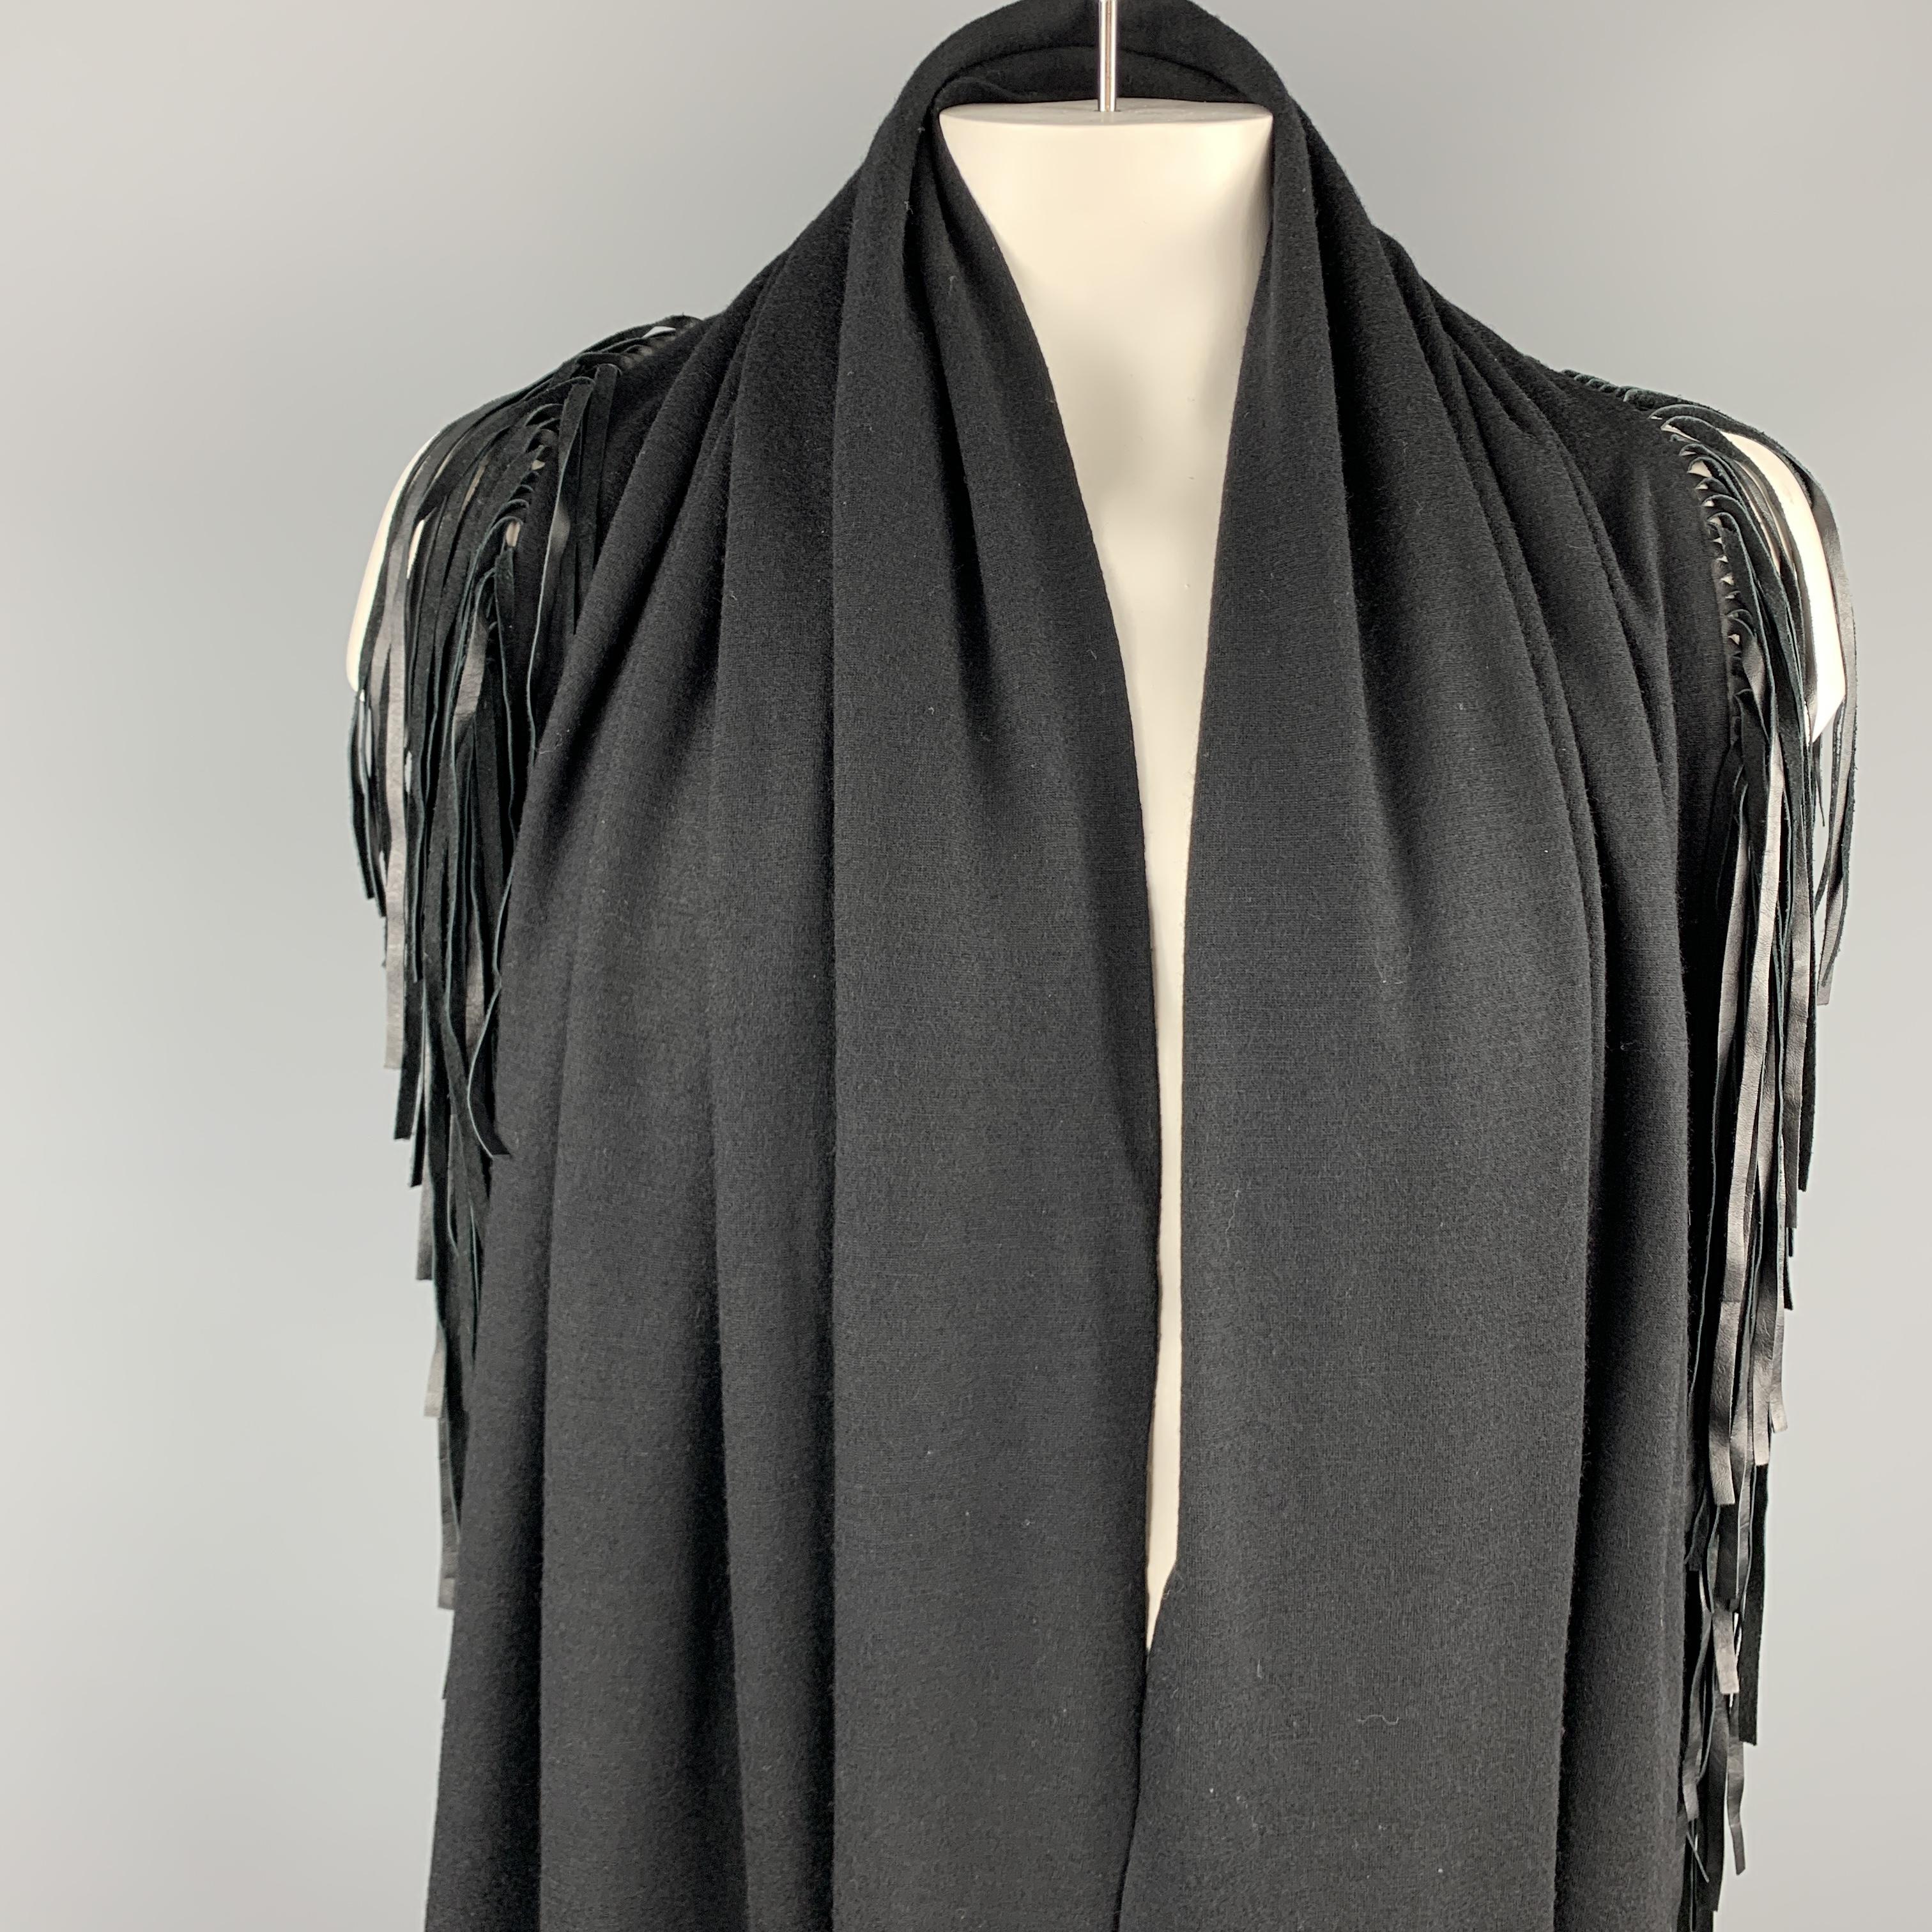 ADRIENNE LANDAU shawl comes in a black wool with a ten inch fringe trim. 

Excellent Pre-Owned Condition. 

Measurements: 

23 in. x 76 in. 